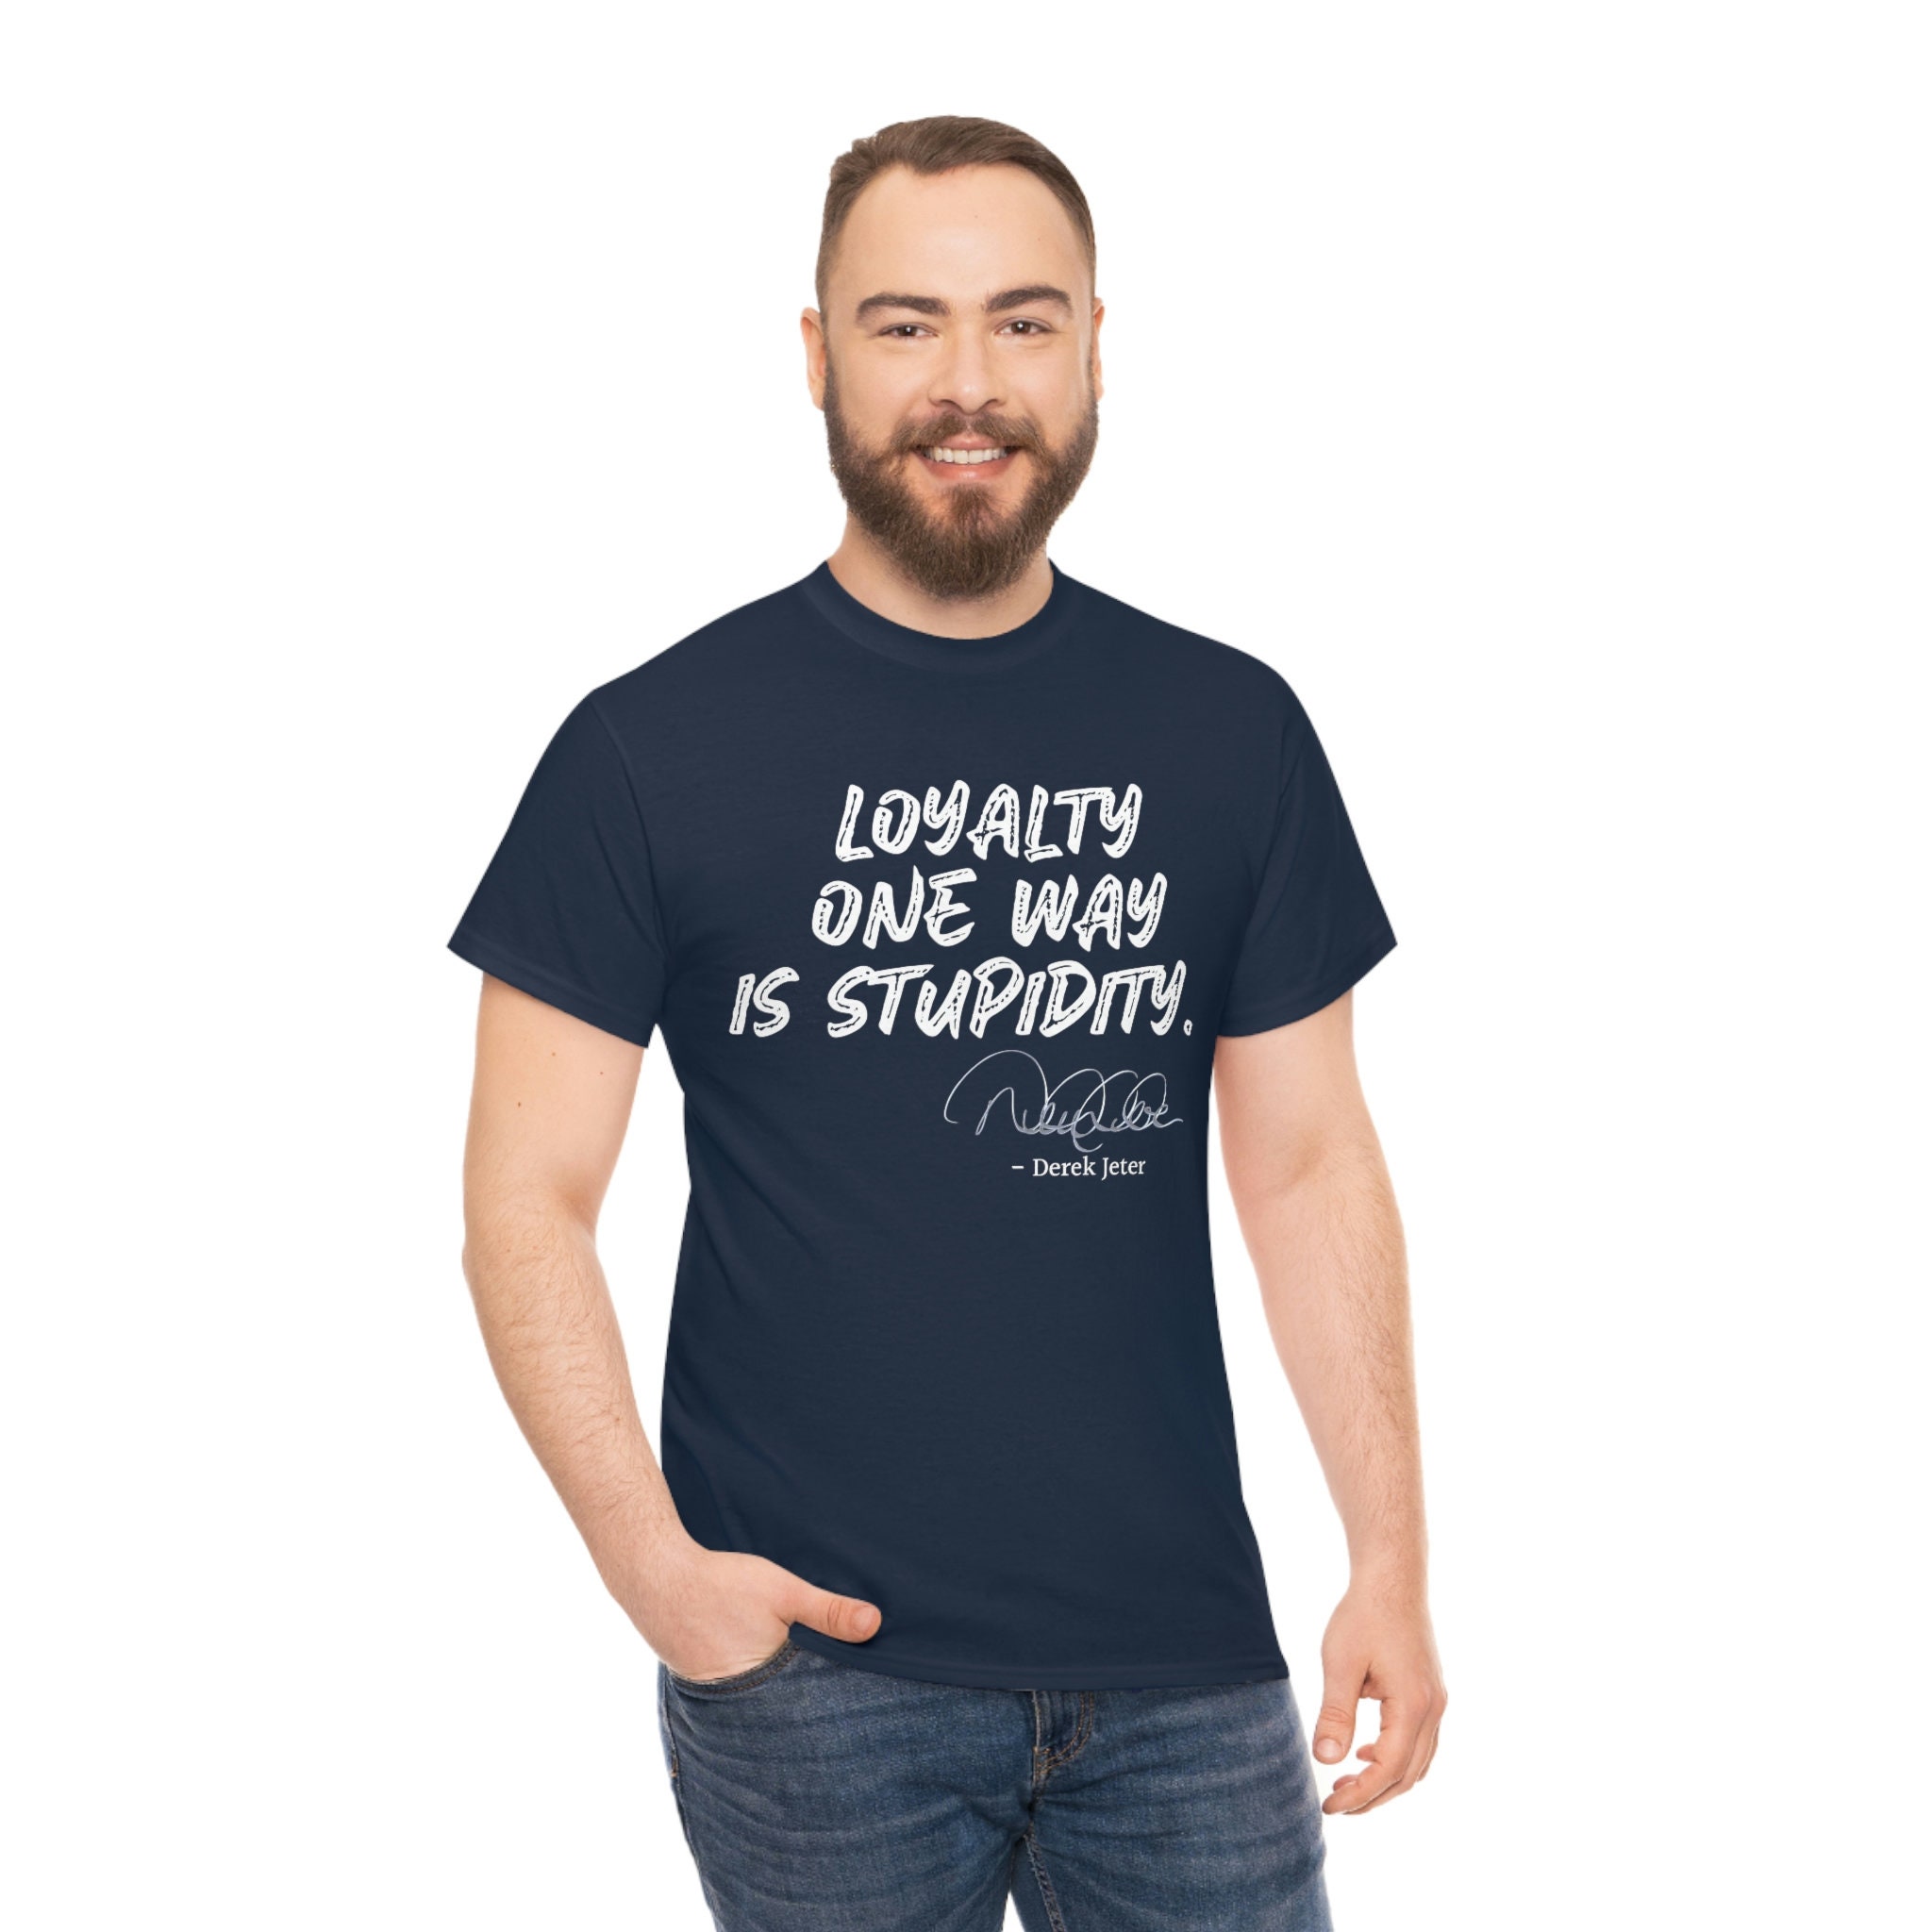 Loyalty One Way is Stupidity Derek Jeter Quote T Shirt the 